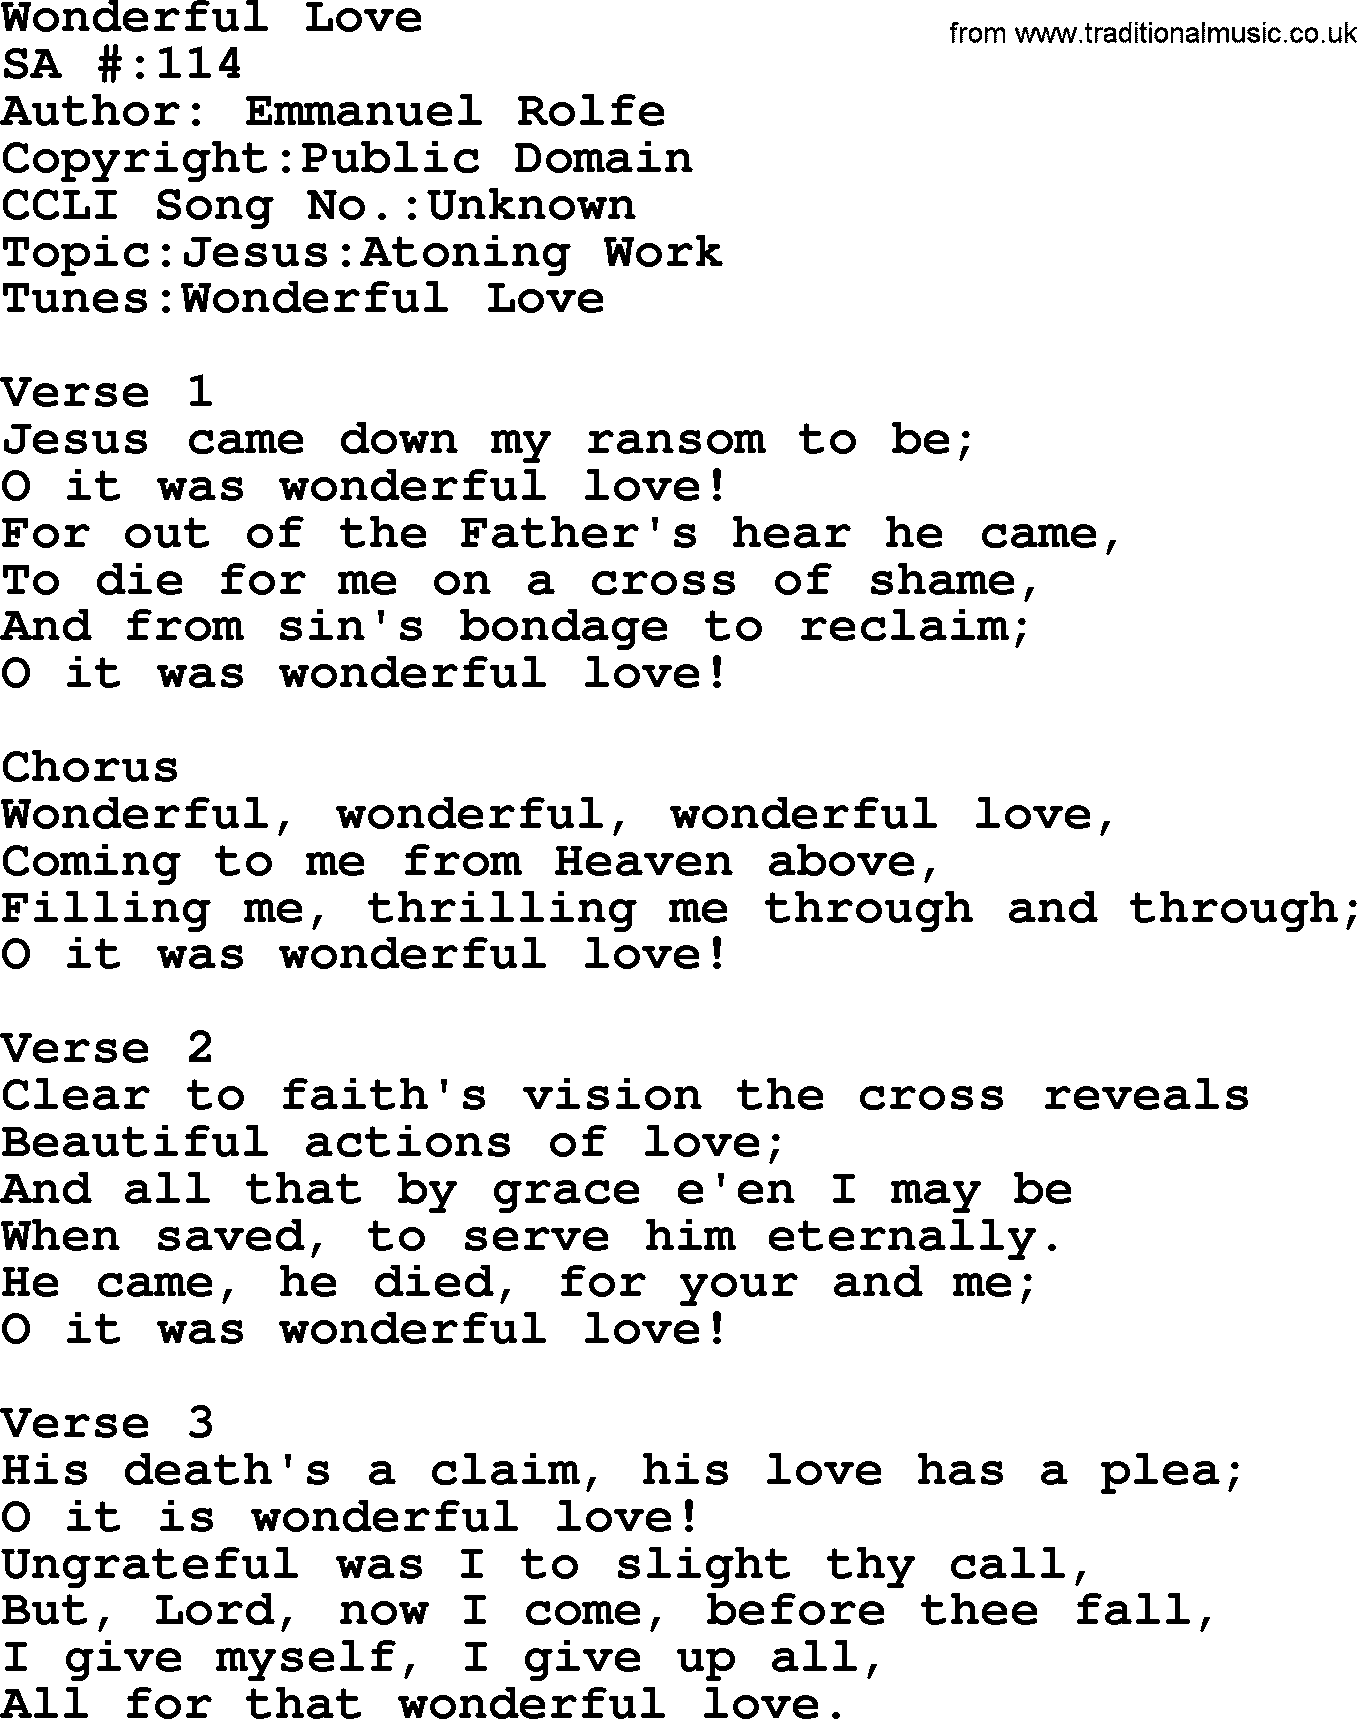 Salvation Army Hymnal, title: Wonderful Love, with lyrics and PDF,